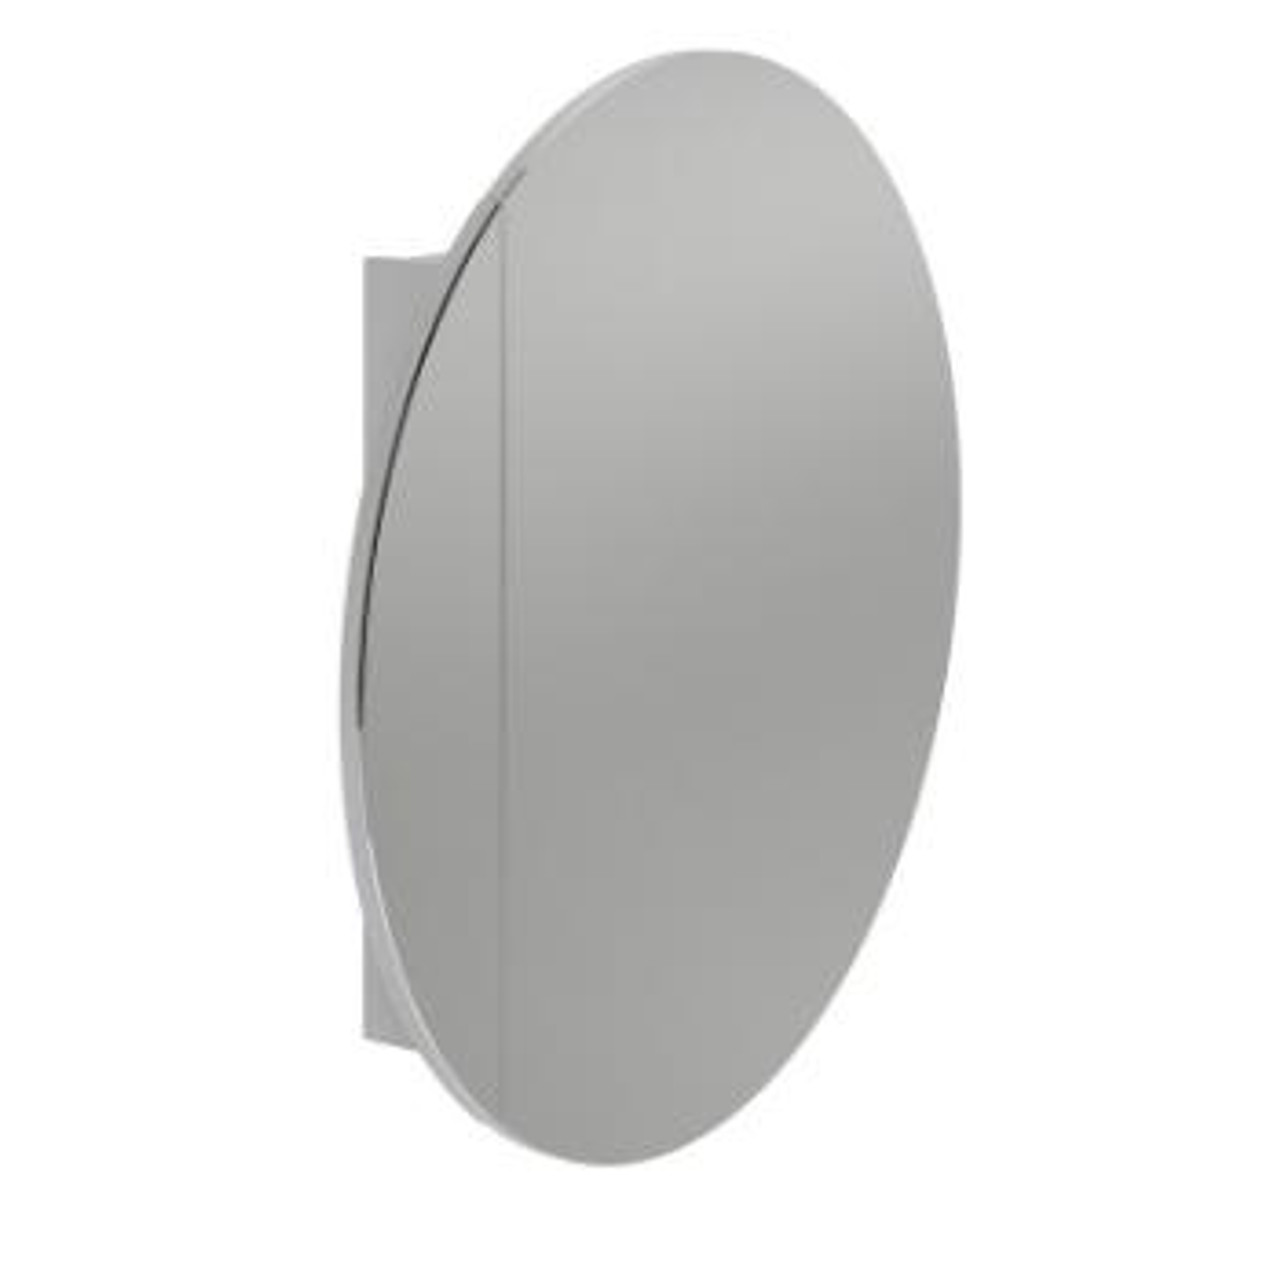 Rifco Cirque Round Shaving Cabinet 900 D Mirror With 600x600mm Cabinet Behind CIRB900